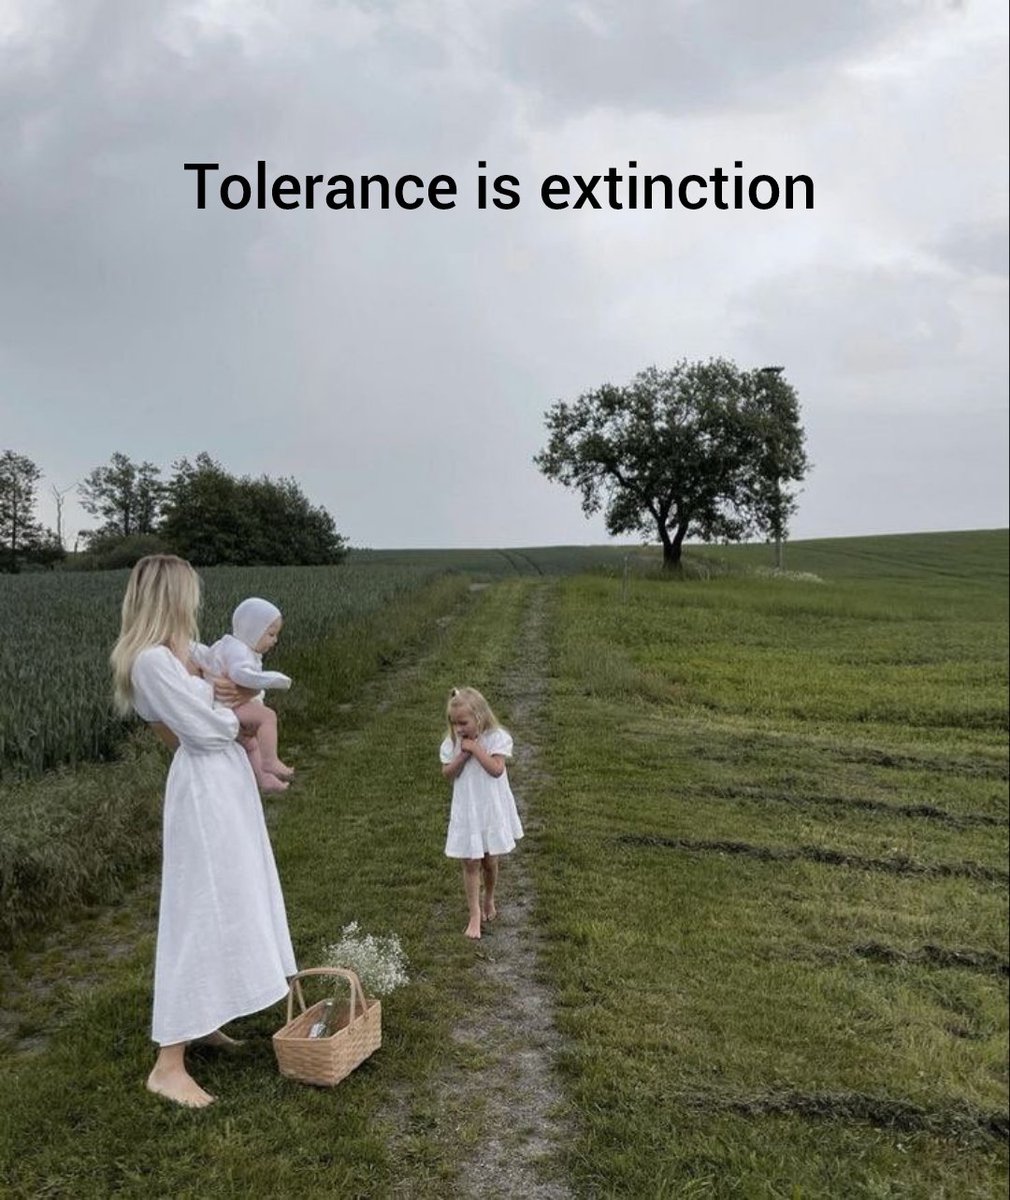 Tolerance is an embrace of self-inflicted social darwinism. It's working against evolutionary mechanisms like instinct of self-preservation & gives a free to spiritual and mental perversion. It's a flowery-termed subversion, forcing you to accept that which should be eradicated.